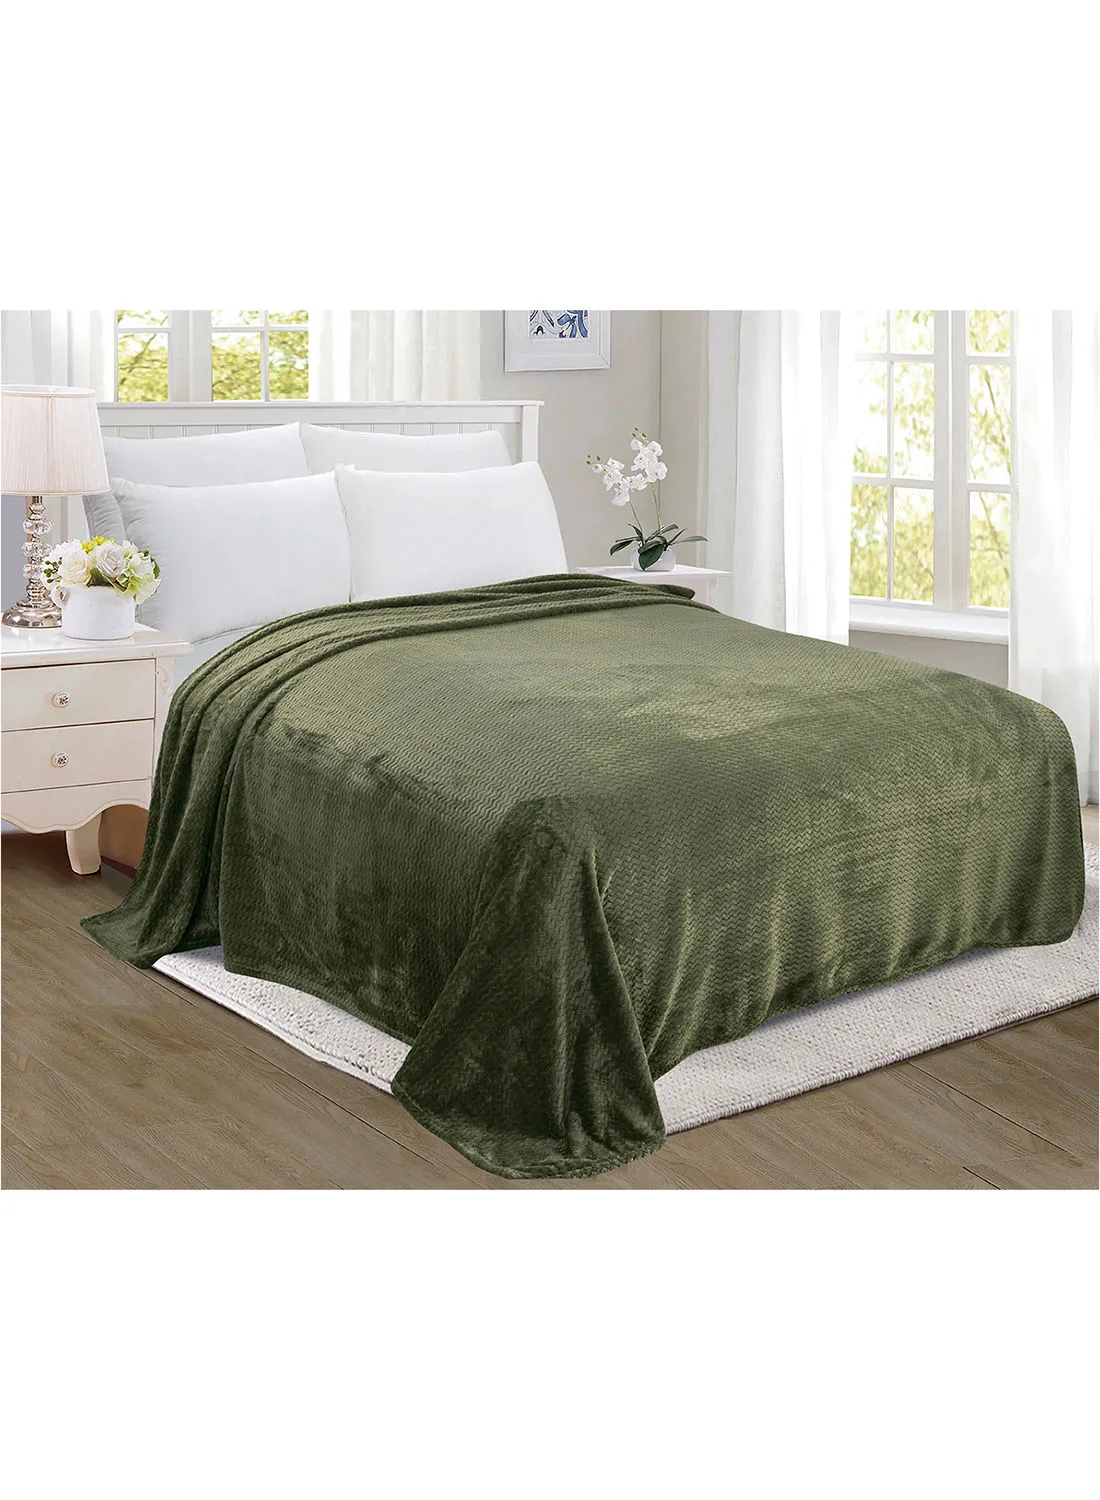 noon east Lightweight Summer Blanket Queen Size 280 GSM Wave Pattern Jaquard Fleece Extra Soft All Season Blanket Bed And Sofa Throw  160 X 220 Cms Green